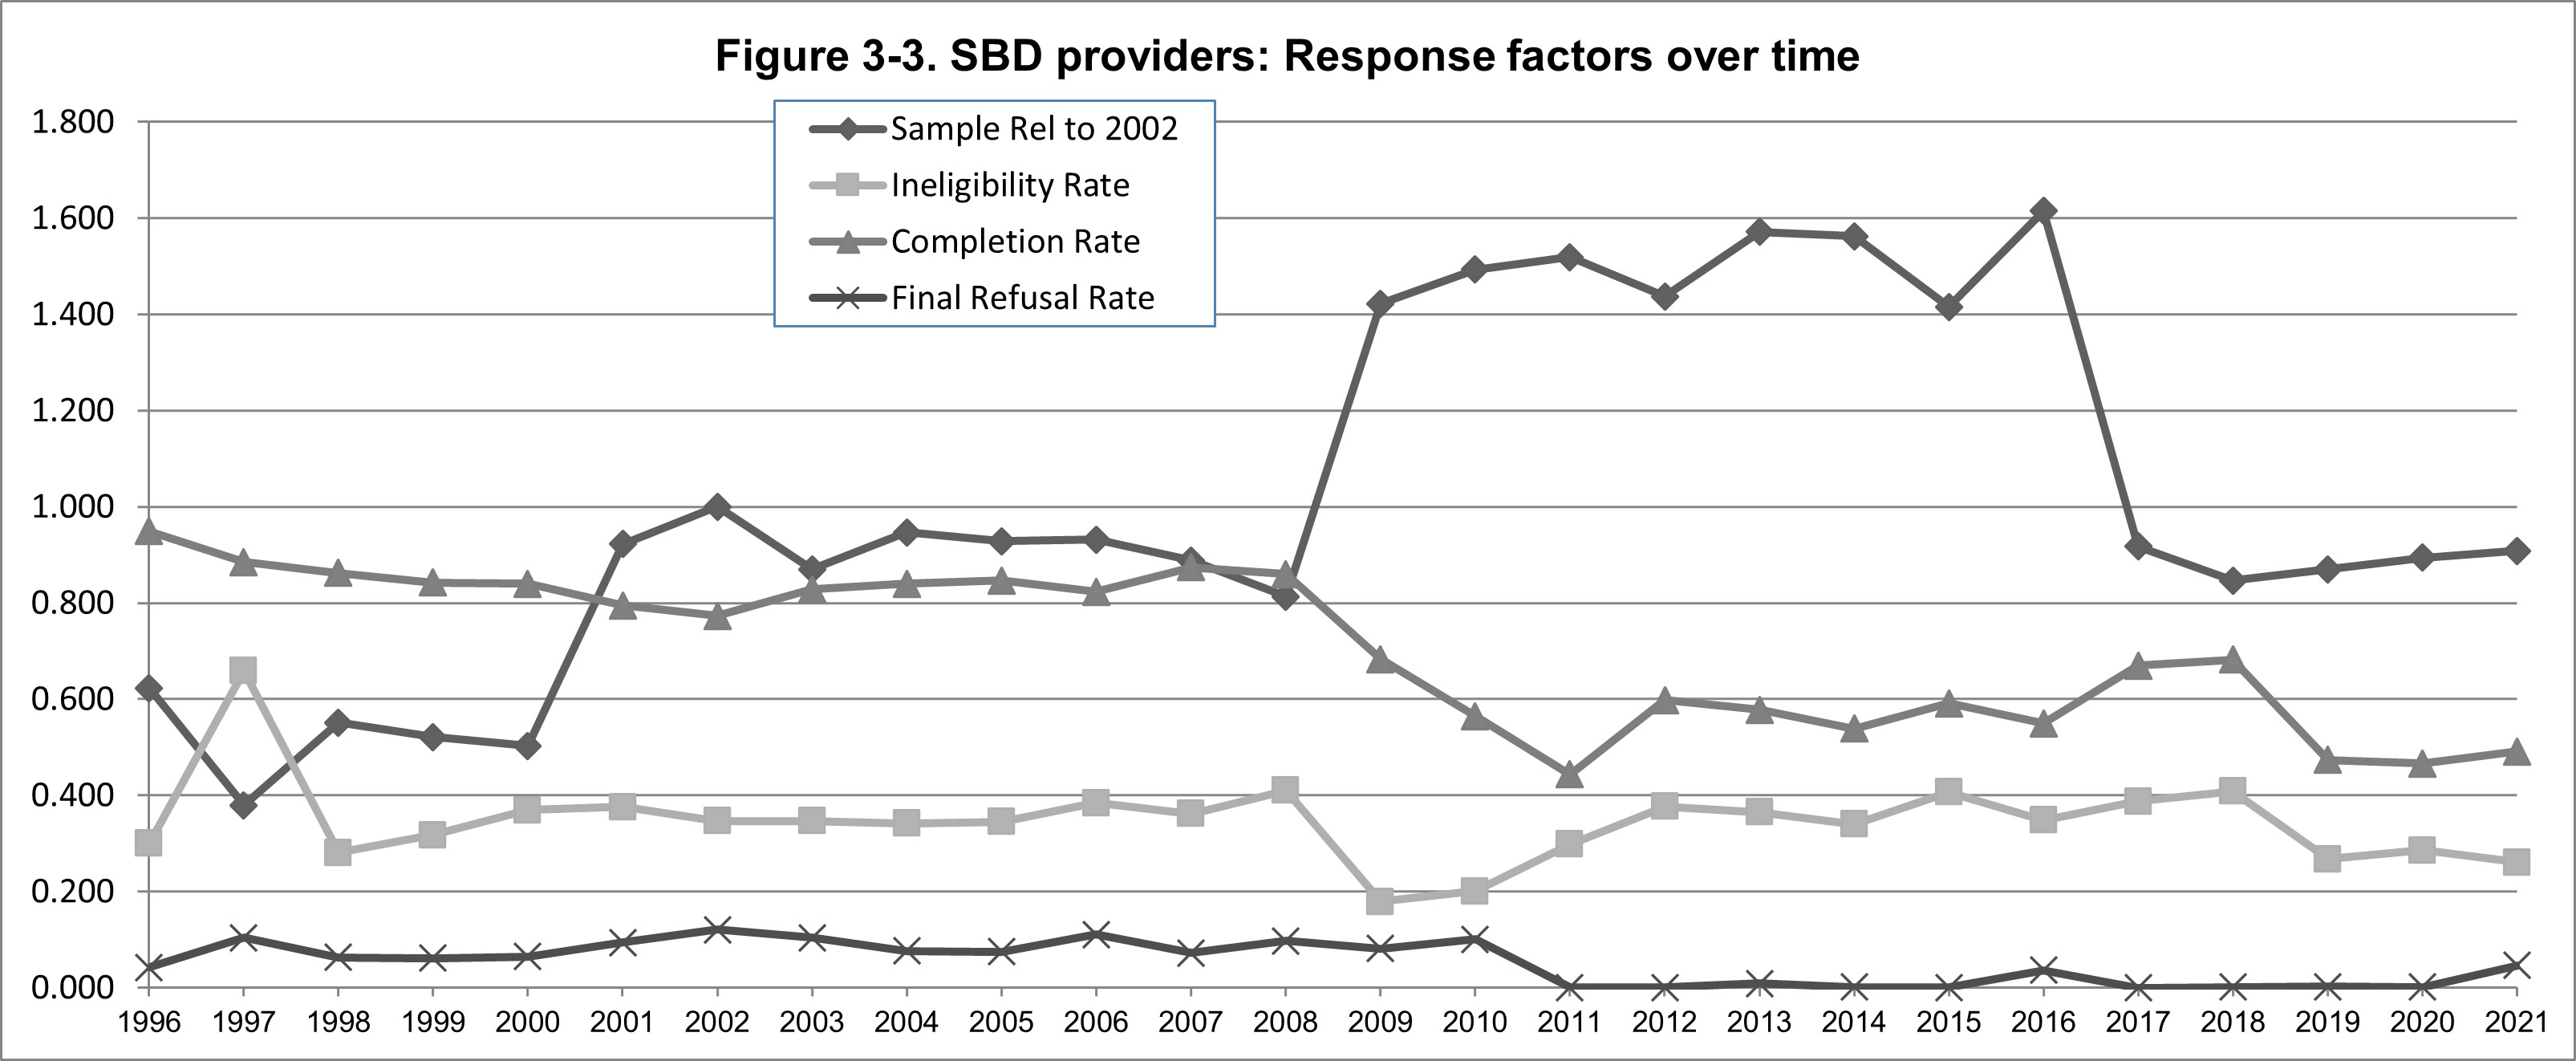 Image displaying response factors over time, from 1996 through 2021 for SBD providers